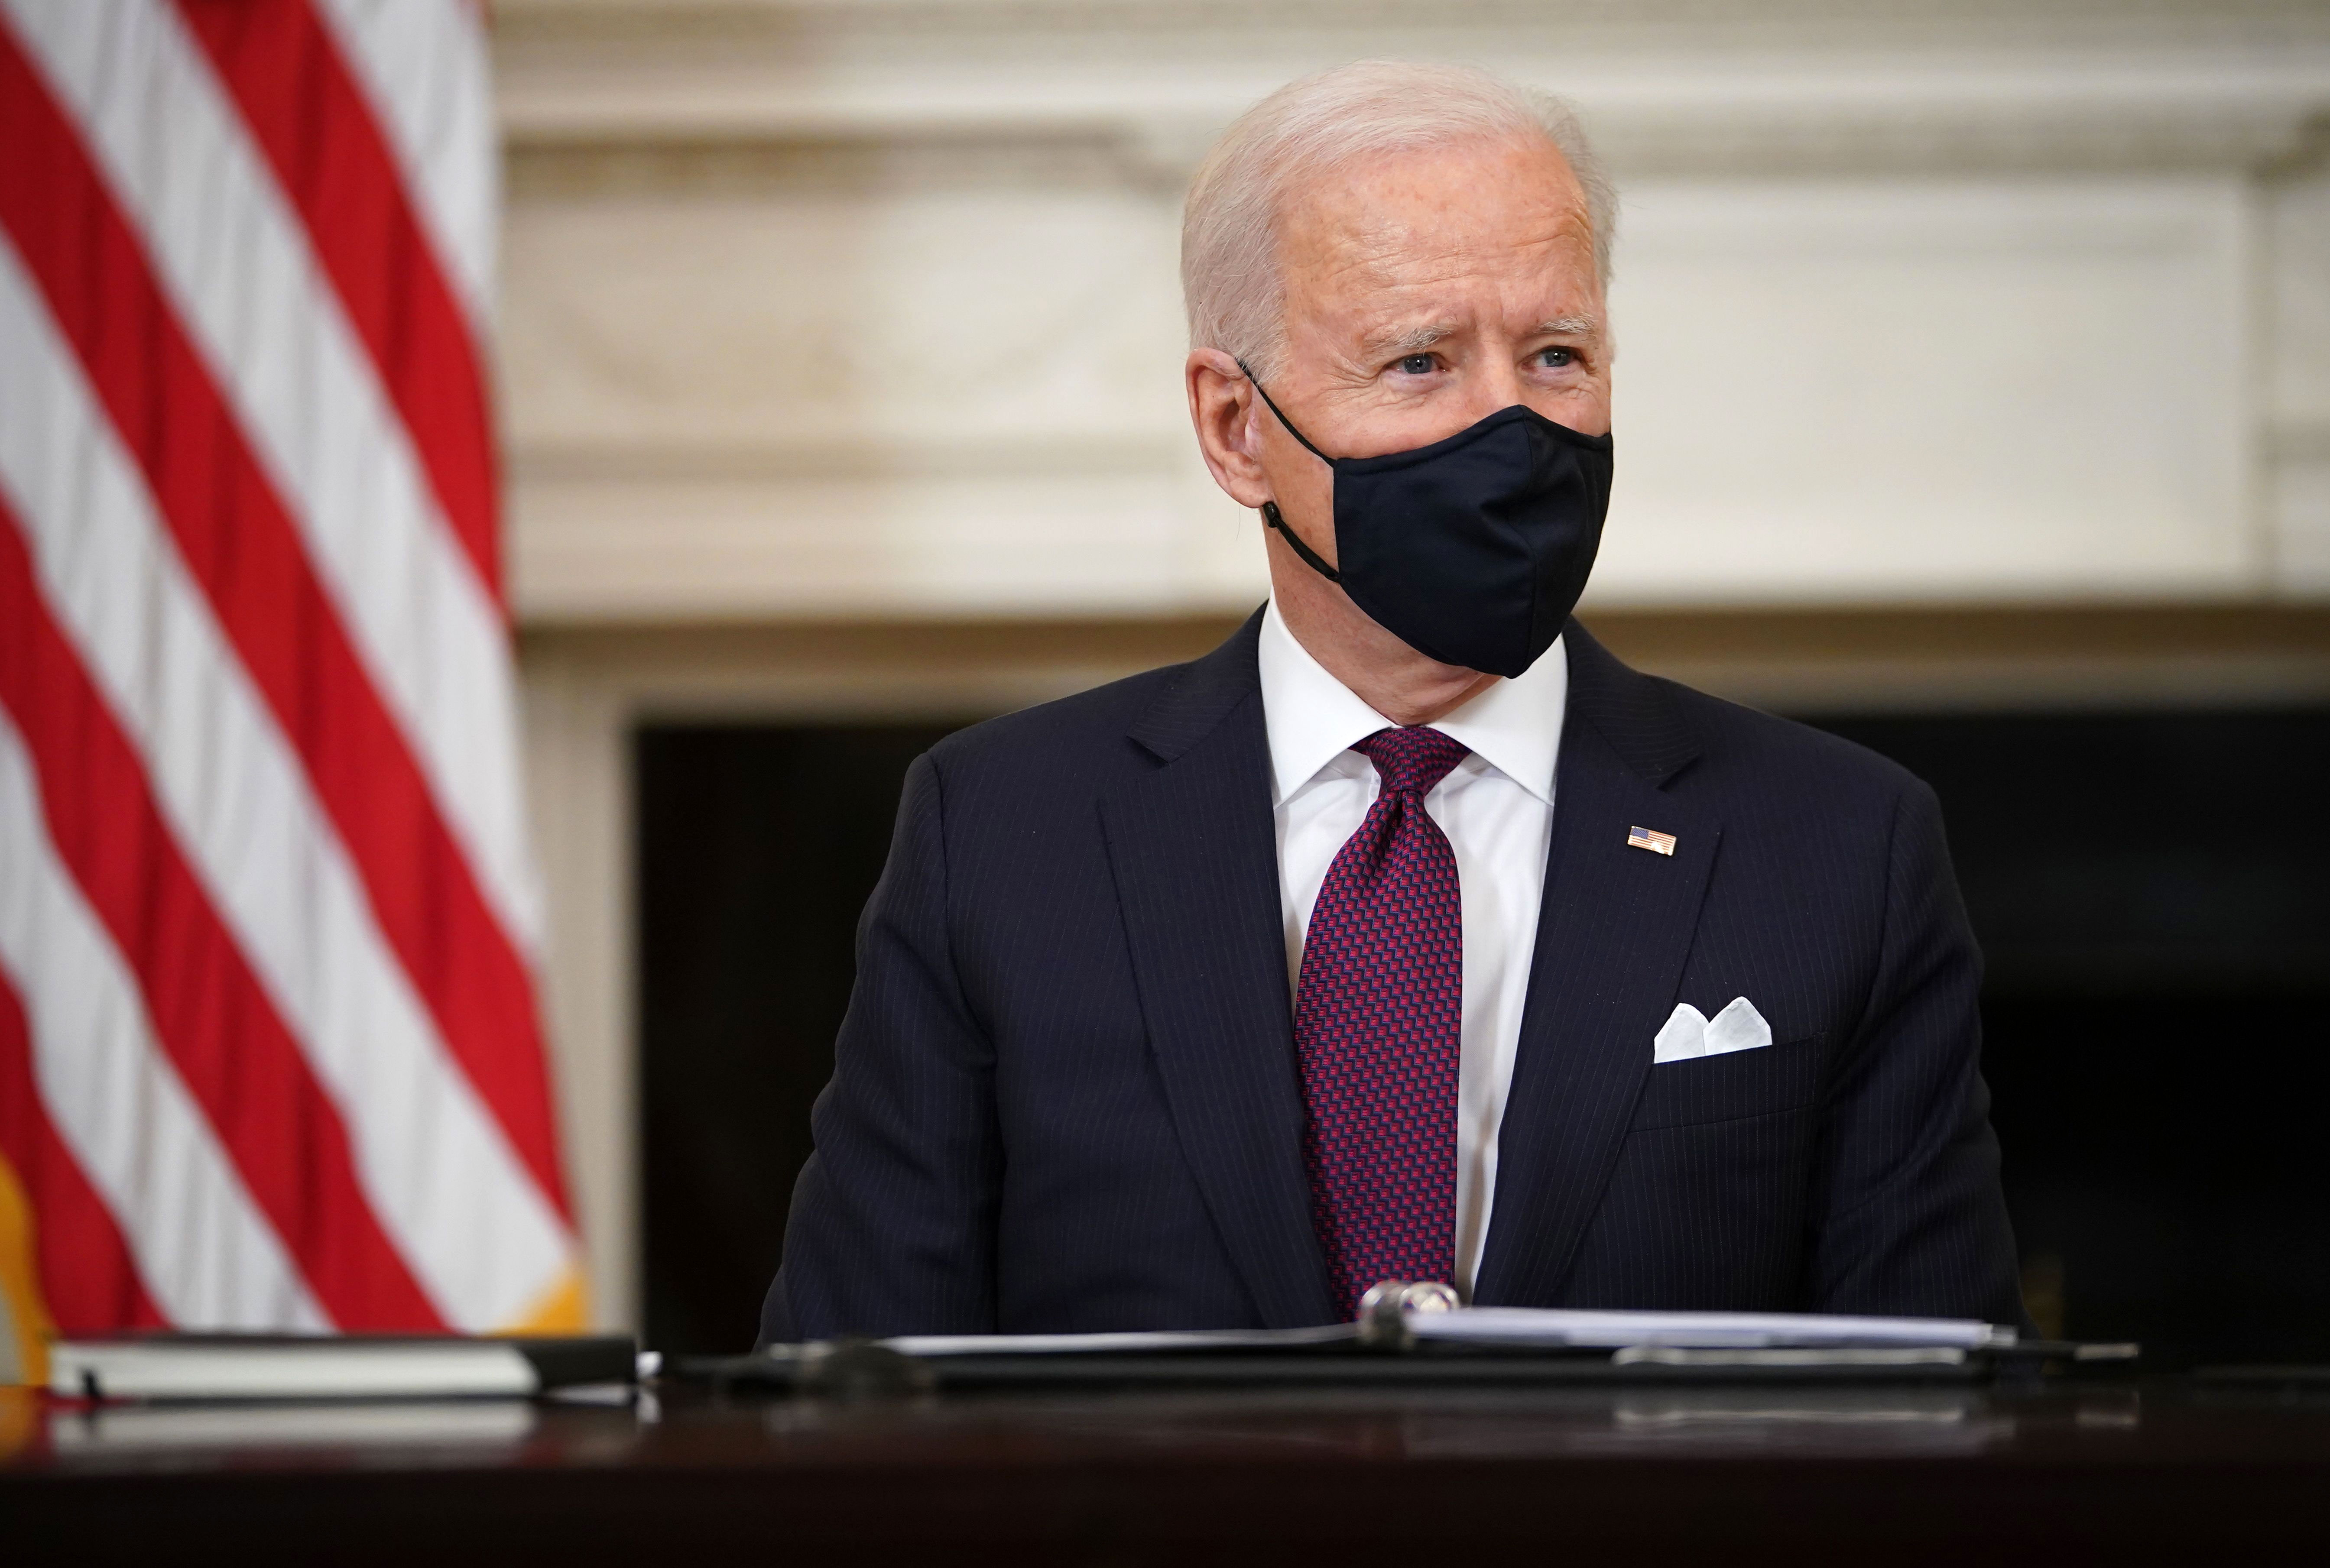 US President Joe Biden takes part in a roundtable discussion at the White House on March 5.